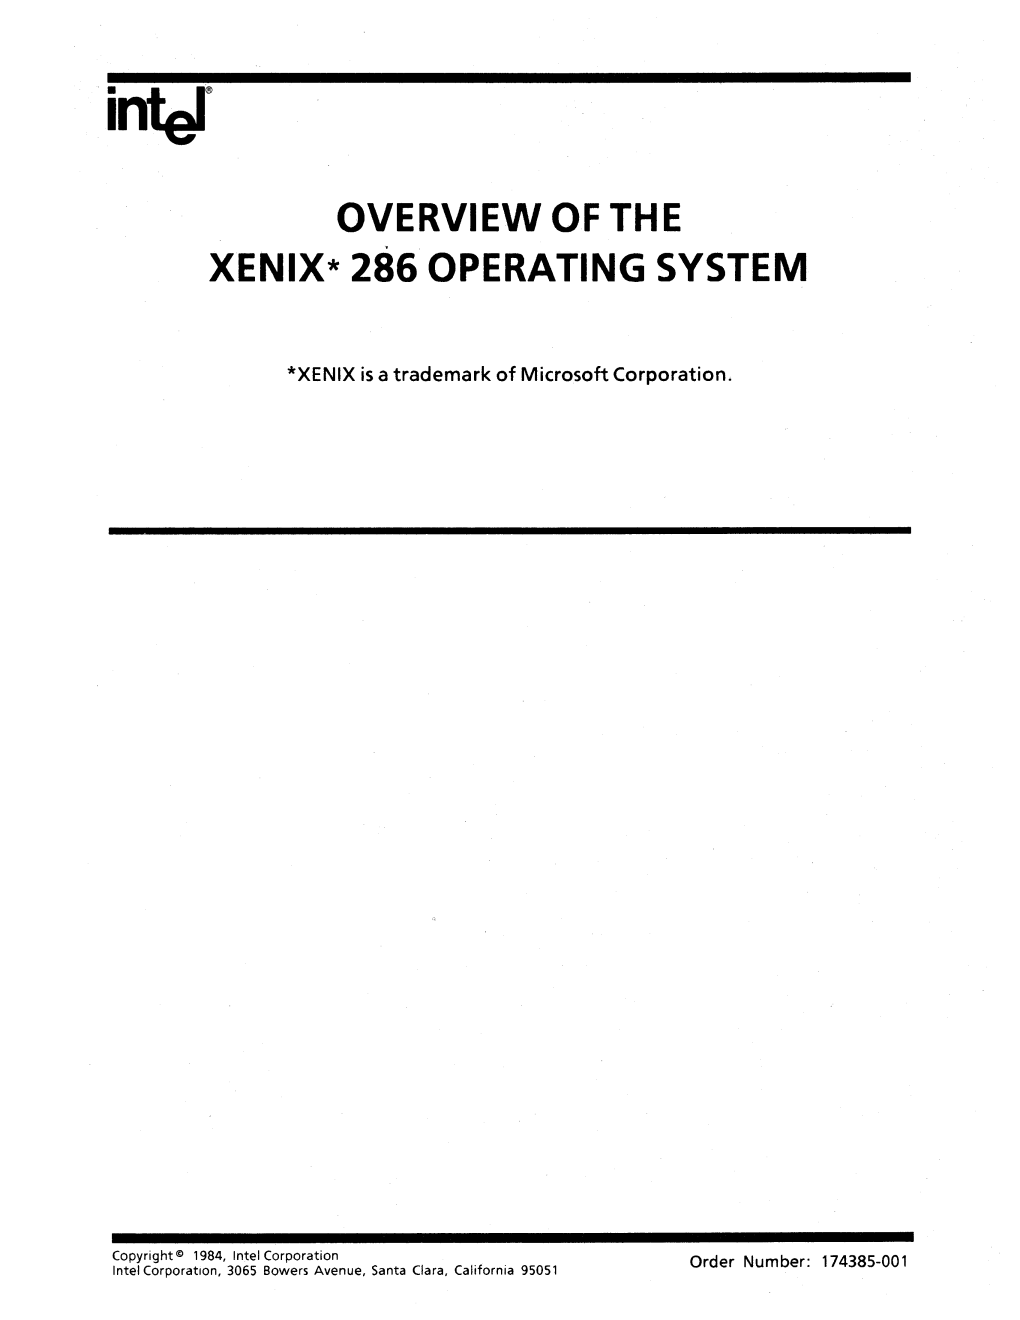 Overview of the Xenix* 286 Operating System